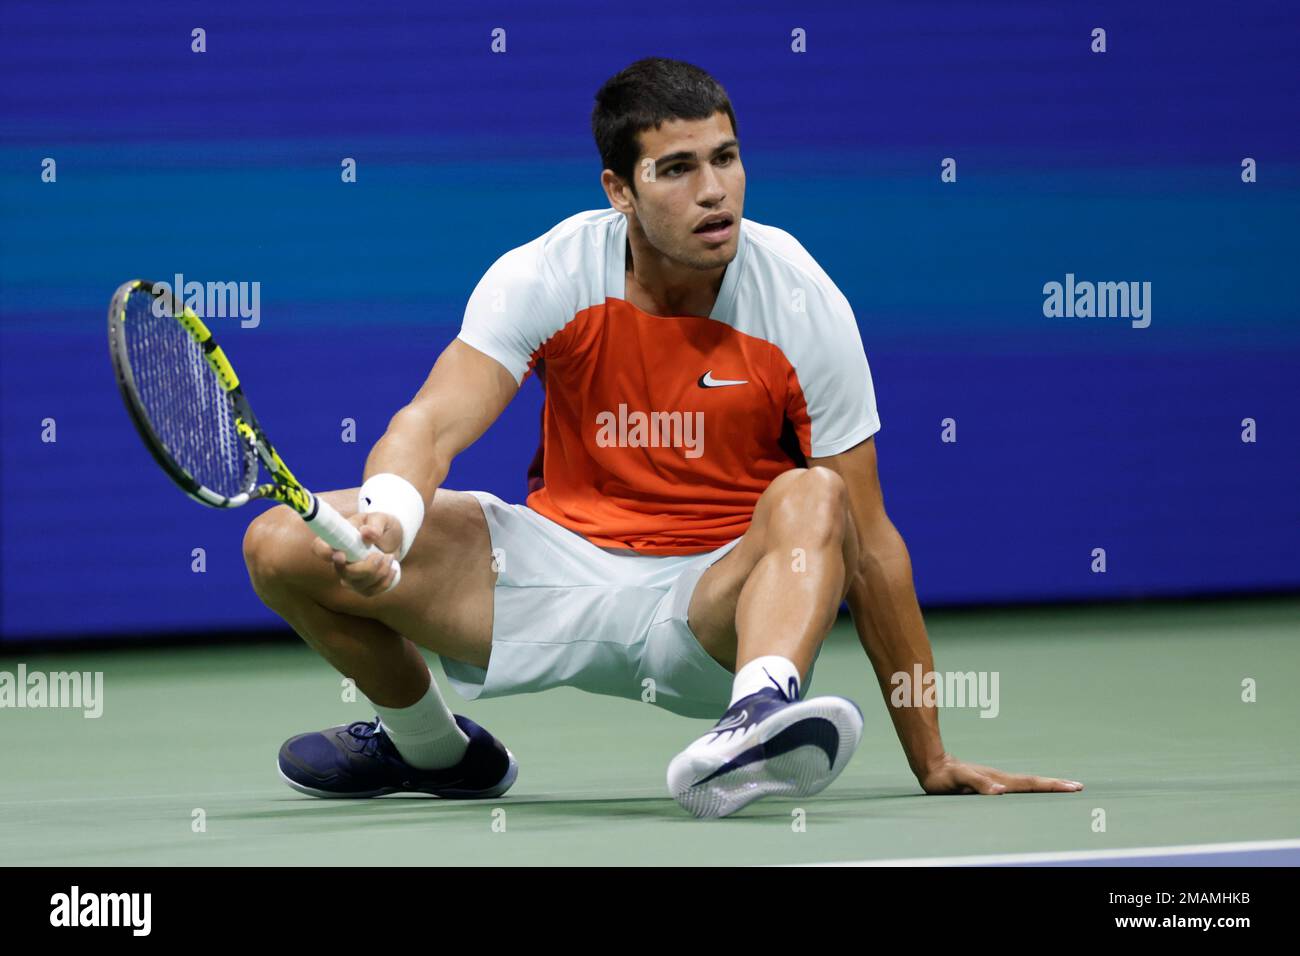 Carlos Alcaraz, of Spain, falls while returning a shot to Marin Cilic, of Croatia, during the fourth round of the U.S. Open tennis championships, Monday, Sept